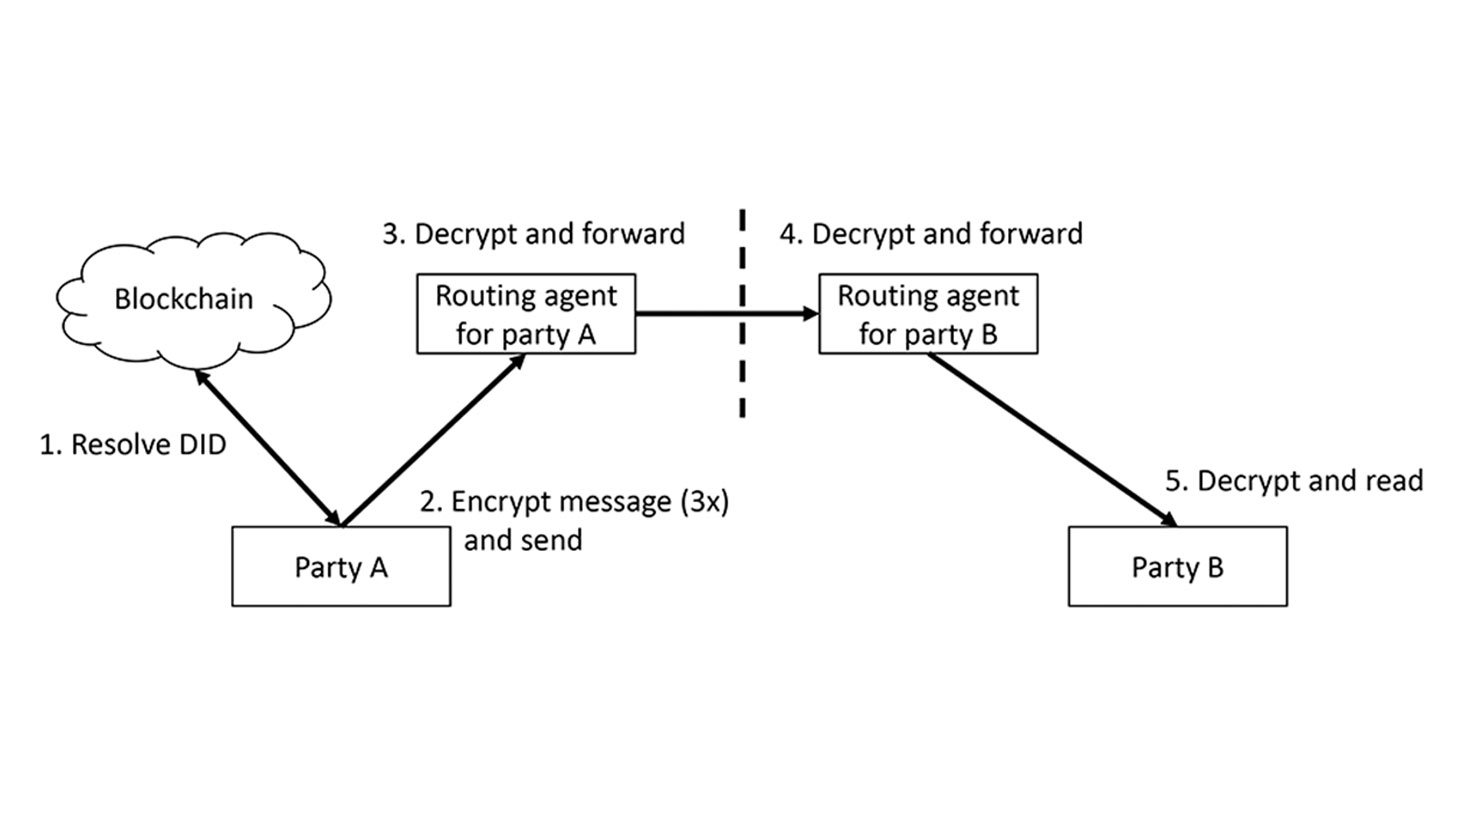 DID-communication-using-routing-agents-to-keep-counterparties-anonymous